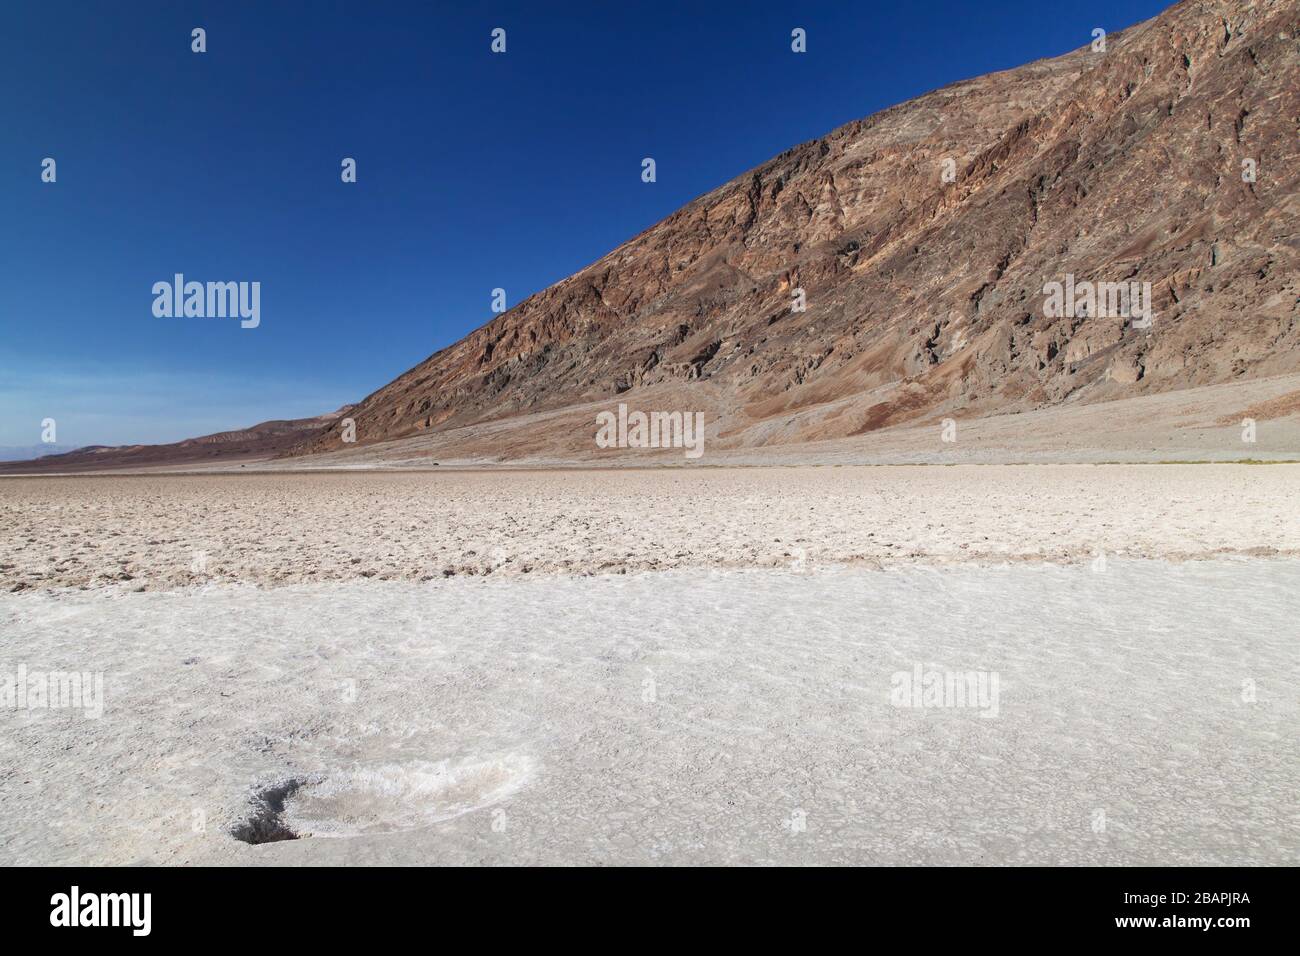 Badwater Basin Salt Flat, Death Valley National Park, California, United States. Stock Photo